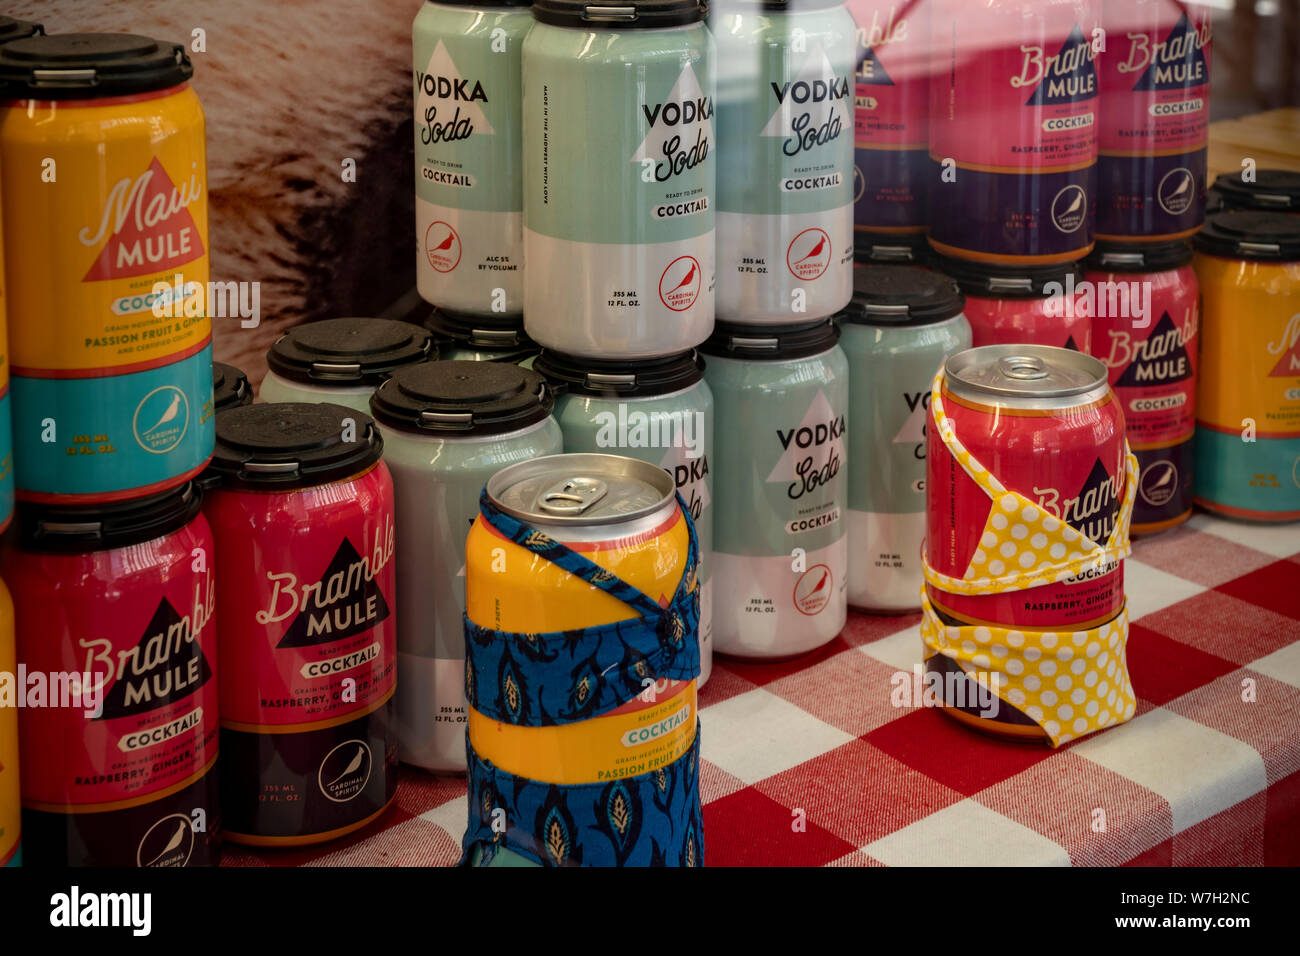 A display of Cardinal Spirits brand of canned liquor and cocktails, geared towards summer imbibing, in a liquor store in New York on Saturday, August 3, 2019. (© Richard B. Levine) Stock Photo